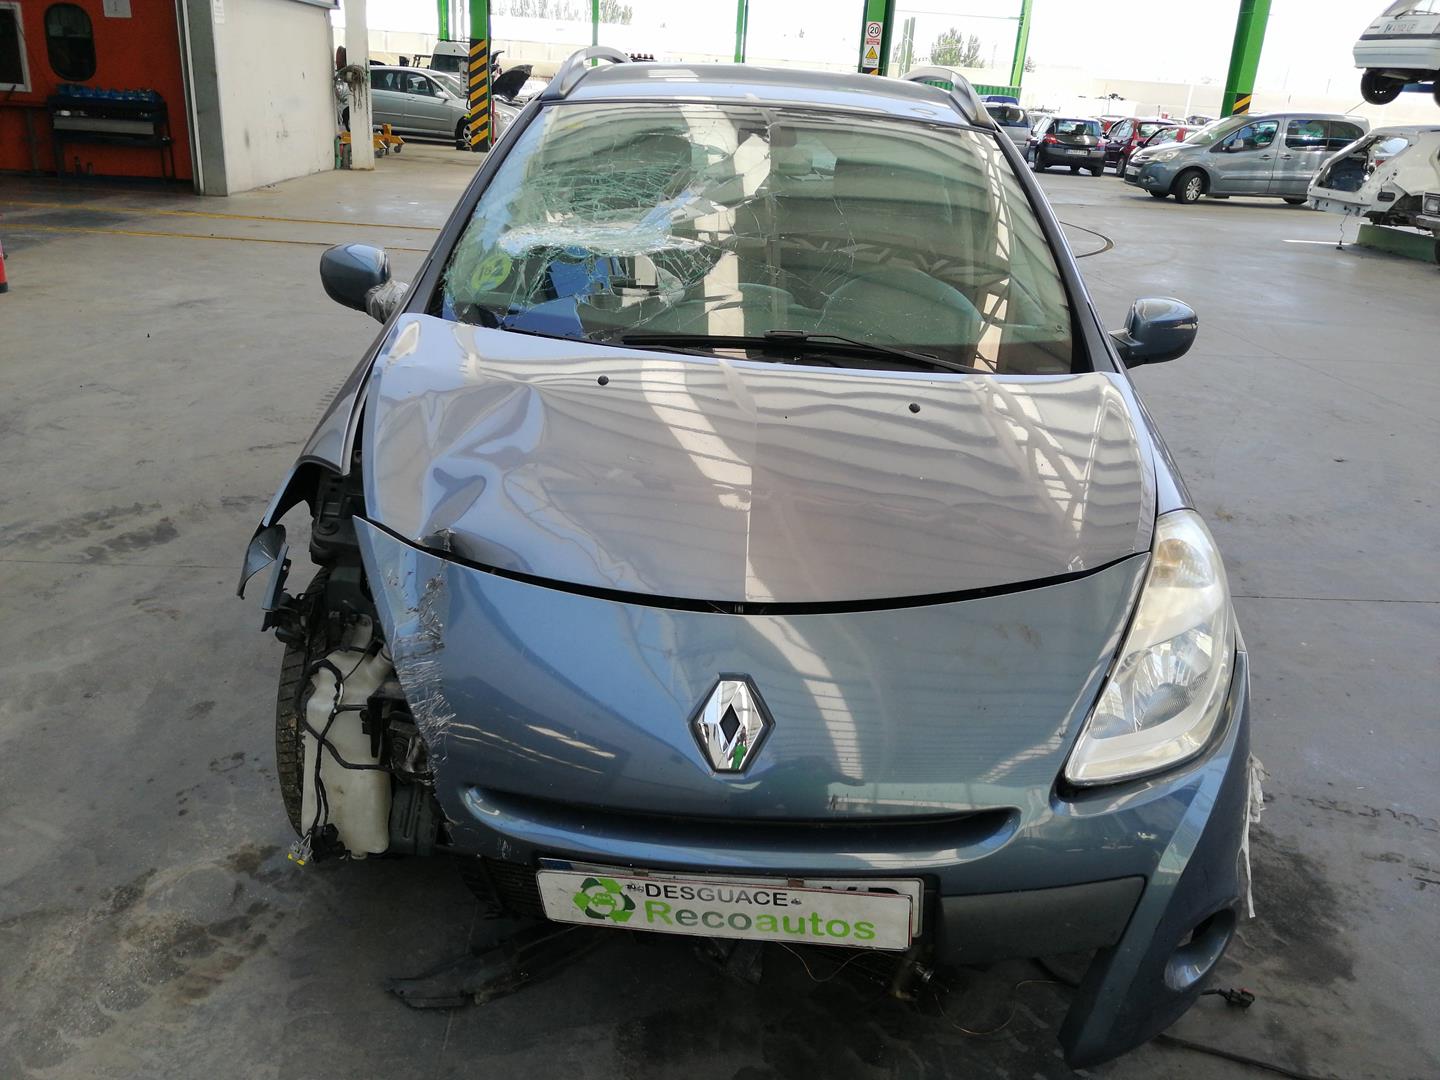 RENAULT Clio 2 generation (1998-2013) Other Control Units 8200906204, 09741859902, MARWAL 21710433